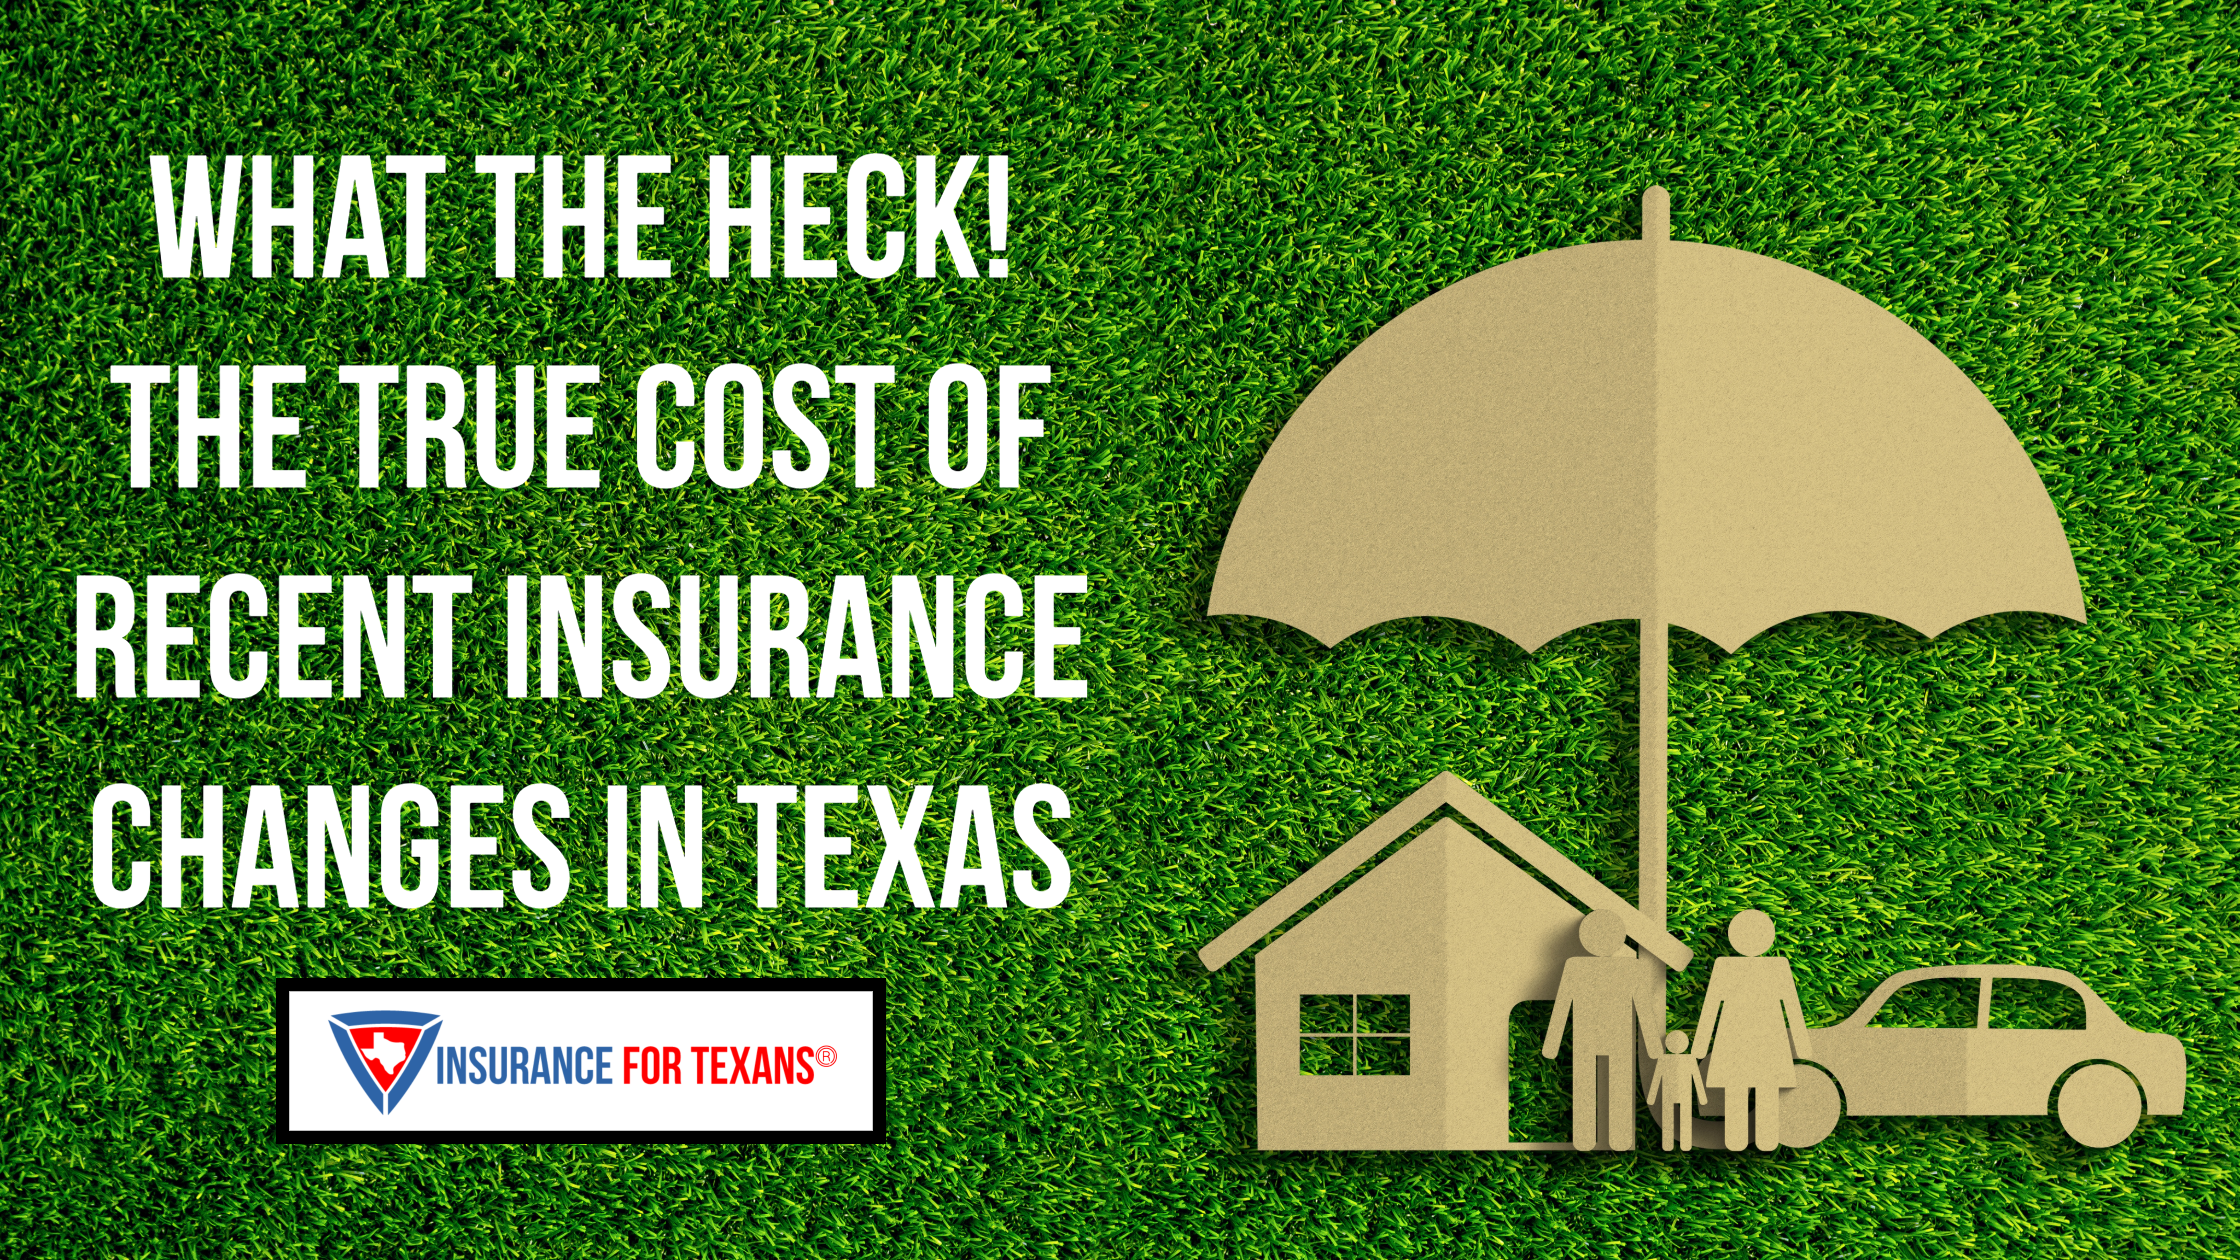 What The Heck! The True Cost of Recent Insurance Changes in Texas